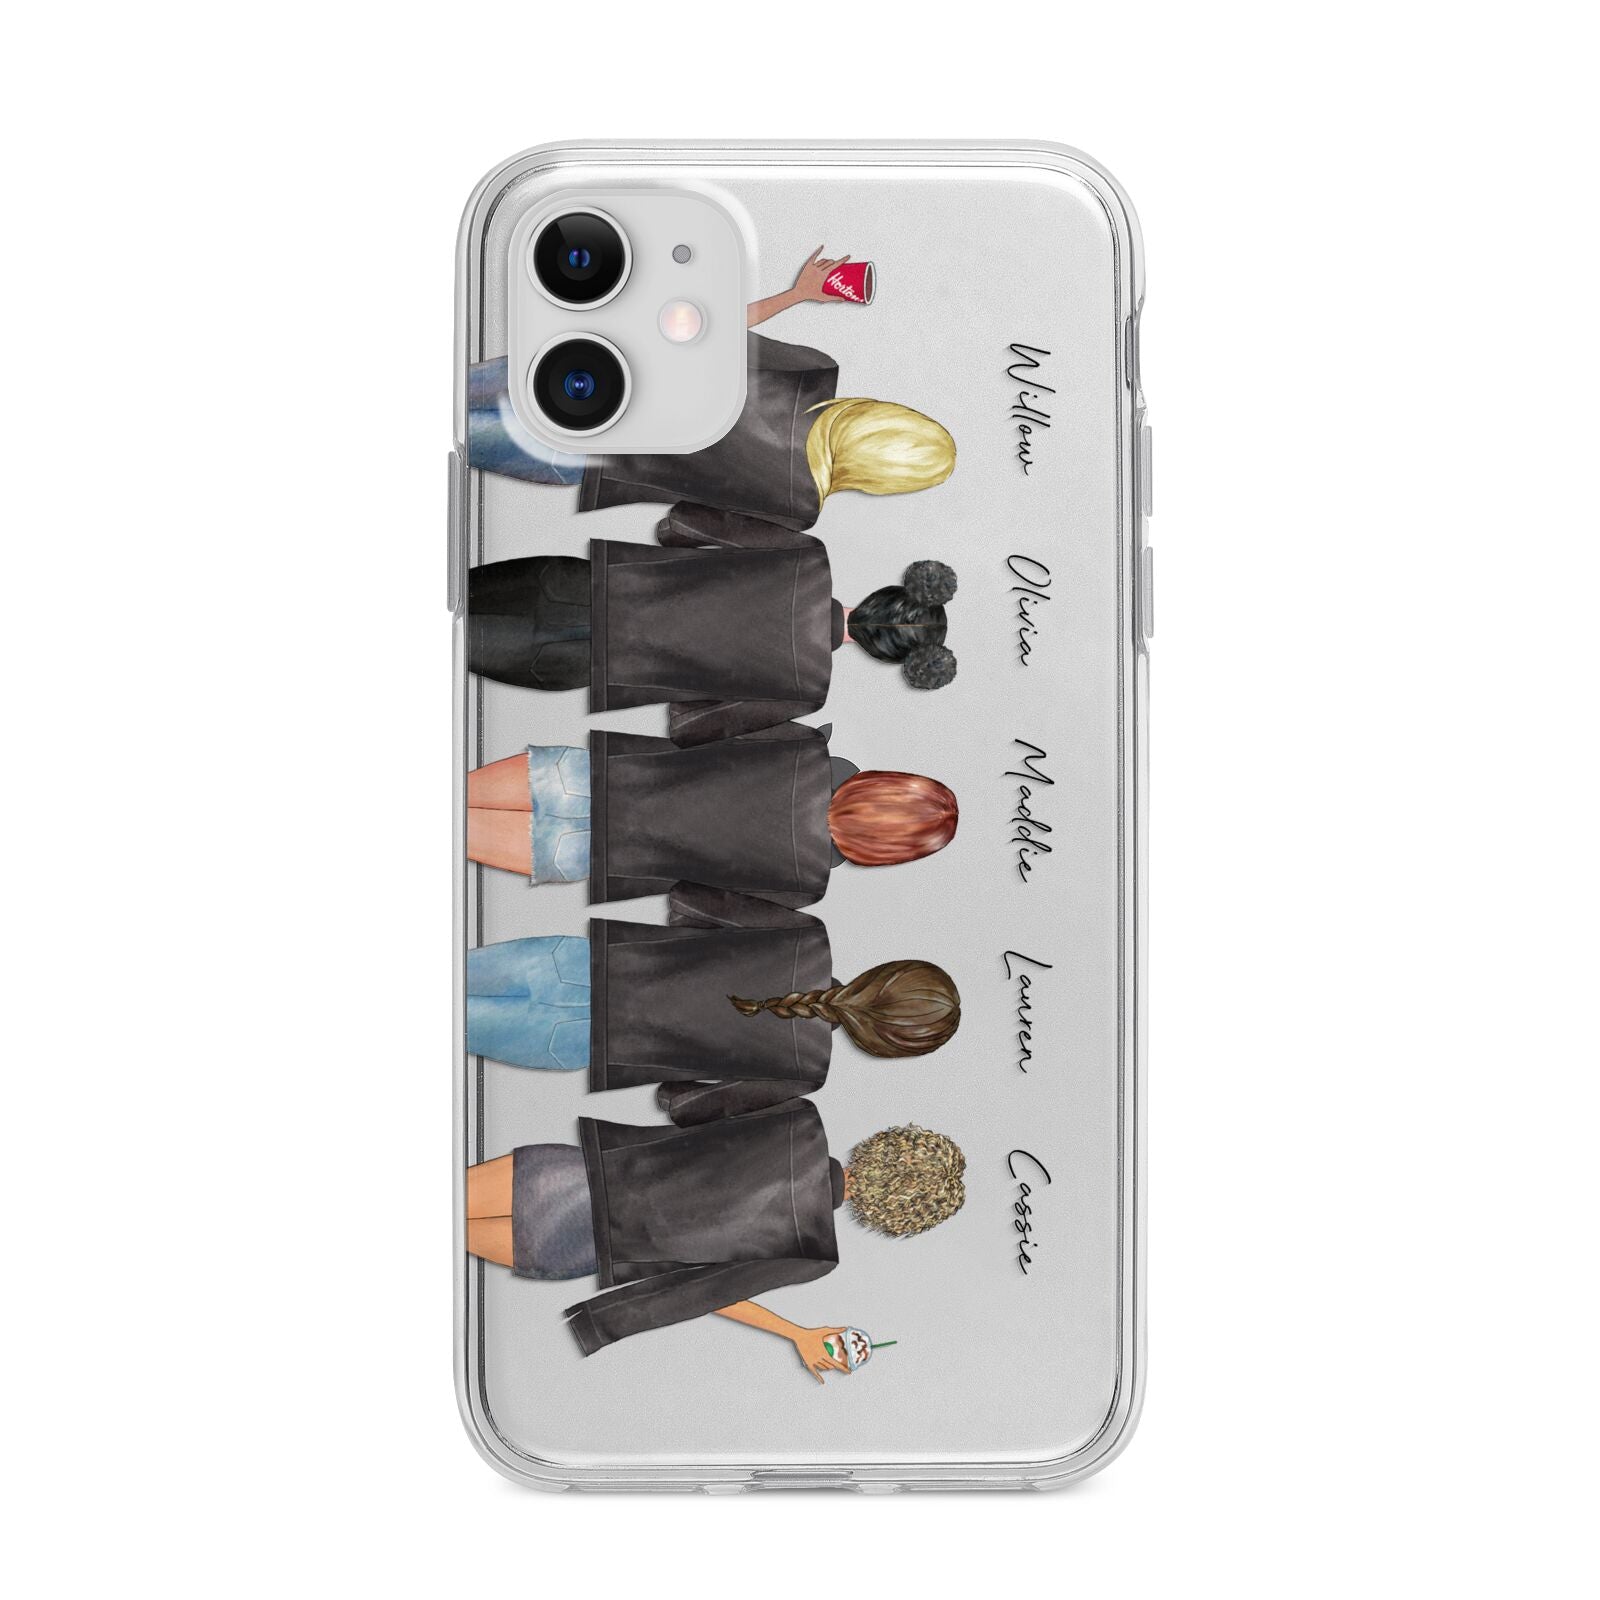 5 Best Friends with Names Apple iPhone 11 in White with Bumper Case